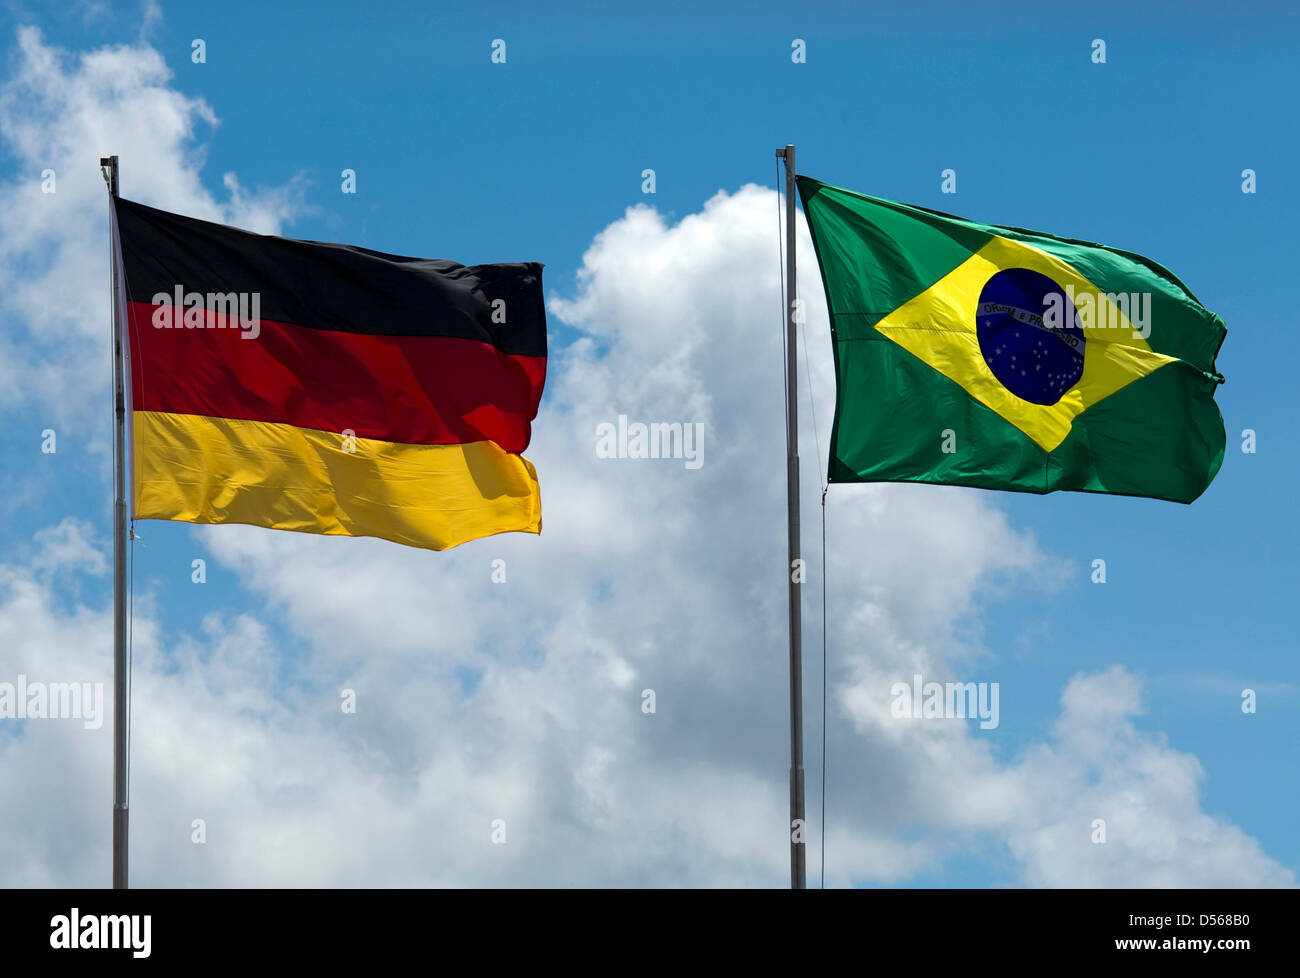 A German (L) and a Brazilian flag sway in the wind during the meeting of German Foreign Minister Guido Westerwelle and his Brazilian counterpart Celso Luiz Nunes Amorim (both unseen) in Brasilia, Brazil, 10 March 2010. Westerwelle is on his so far longest journey abroad, paying visits to Chile, Argentina, Uruguay and Brazil. Photo: ARNO BURGI Stock Photo